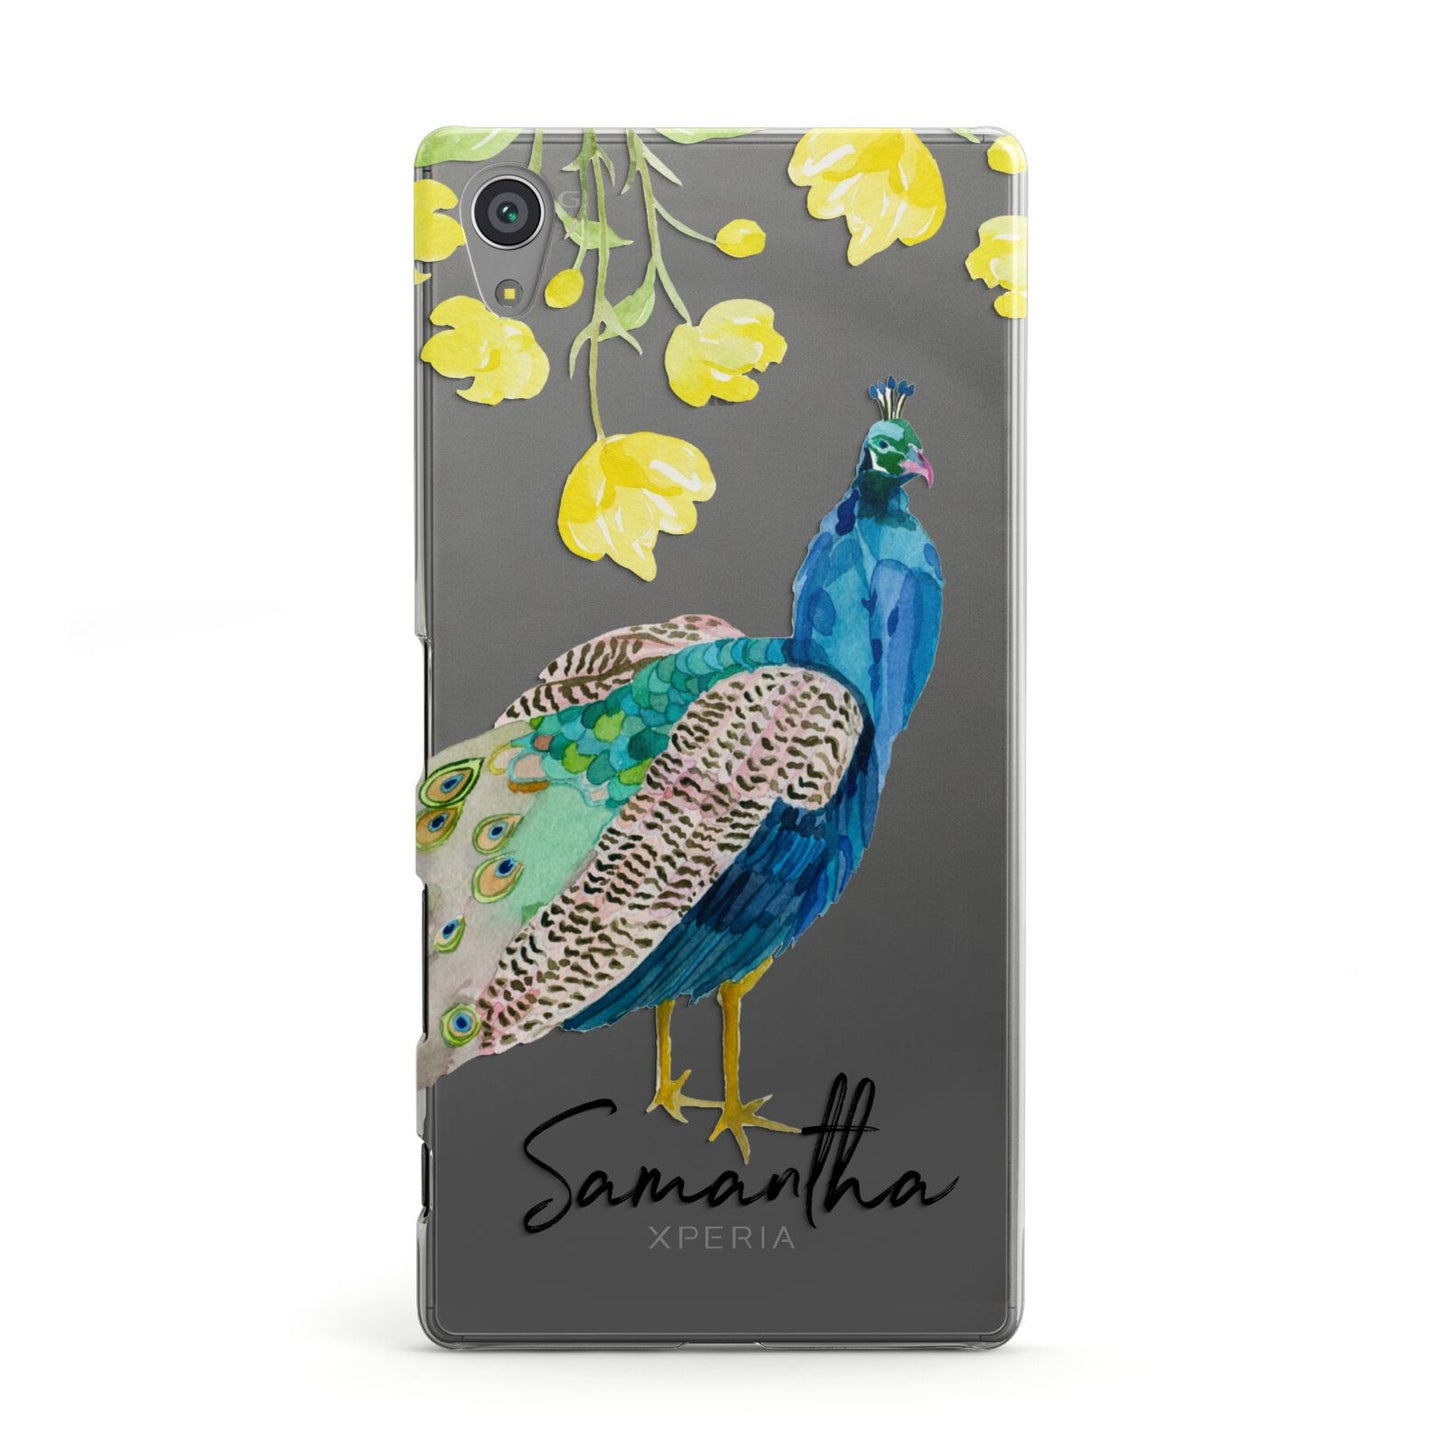 Personalised Peacock Sony Xperia Case